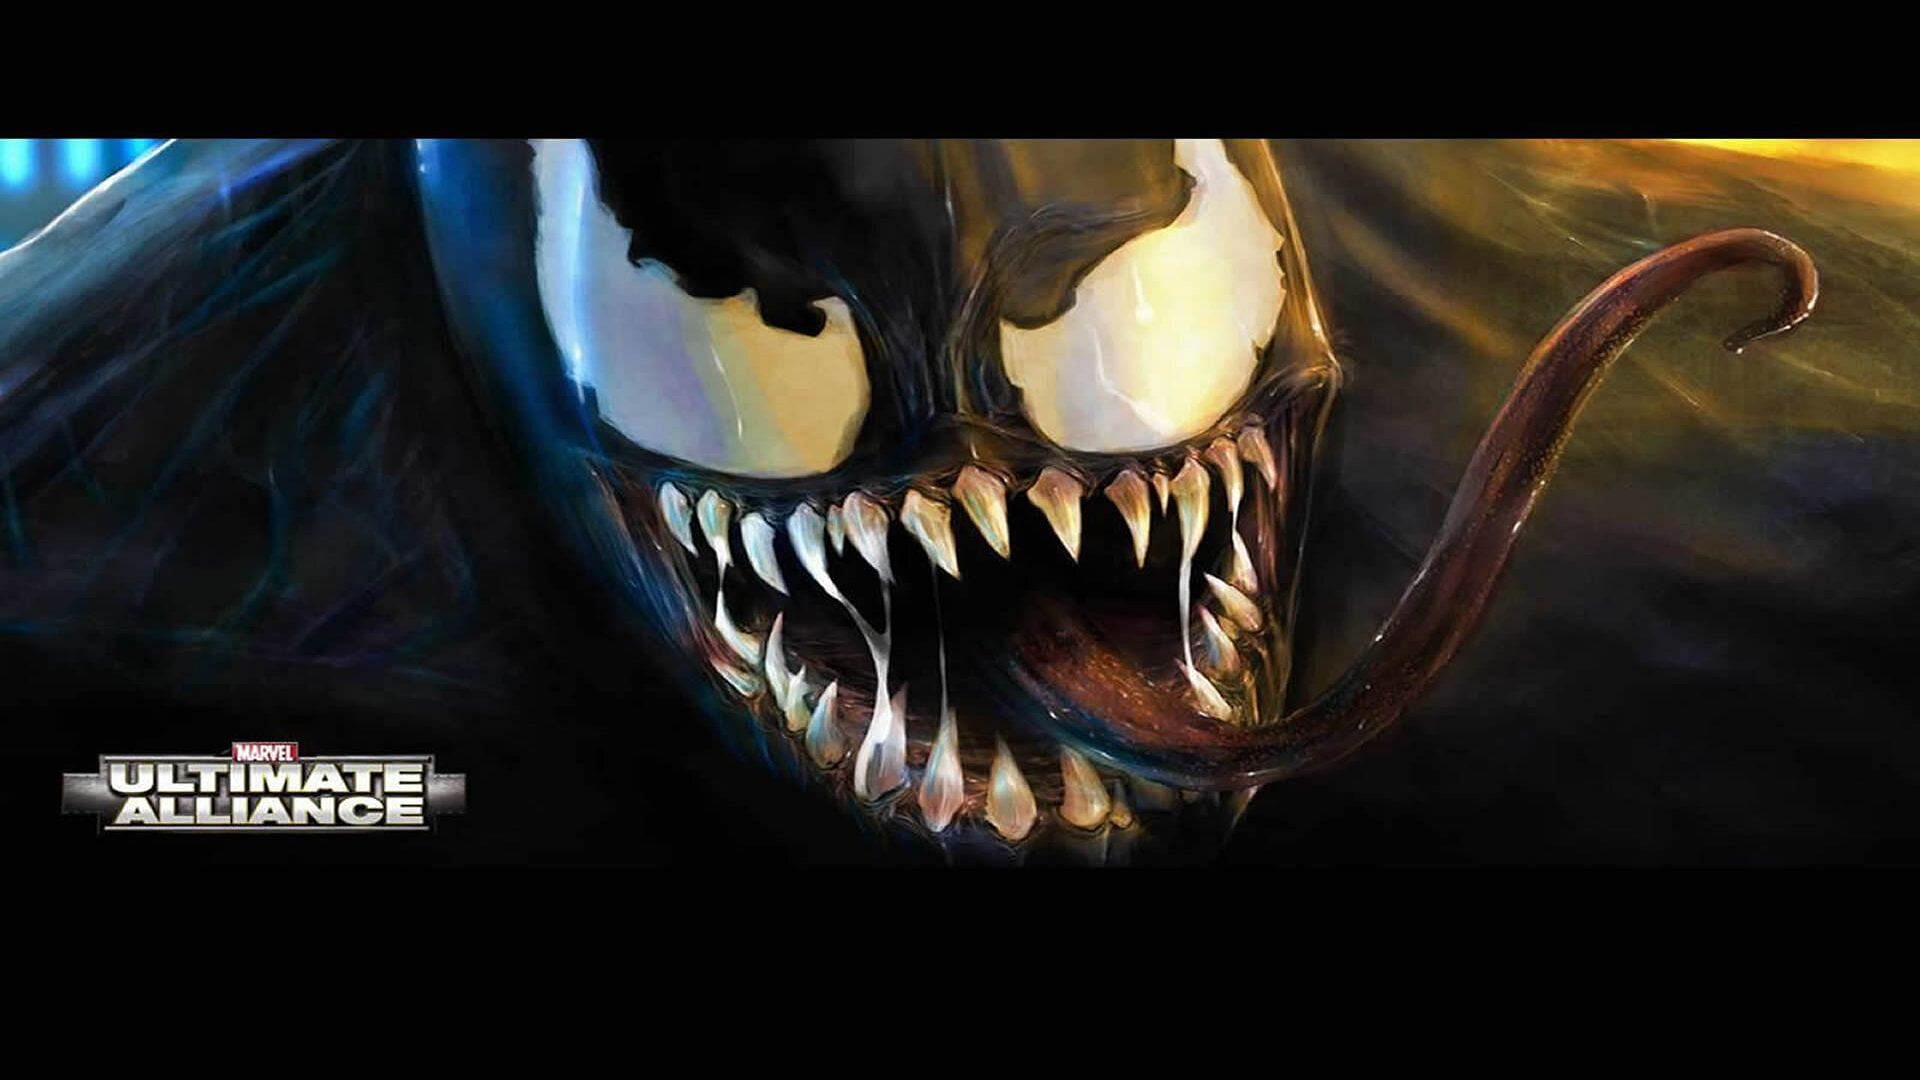 The black Symbiote is one of the playable characters in this game (Image via Activision)